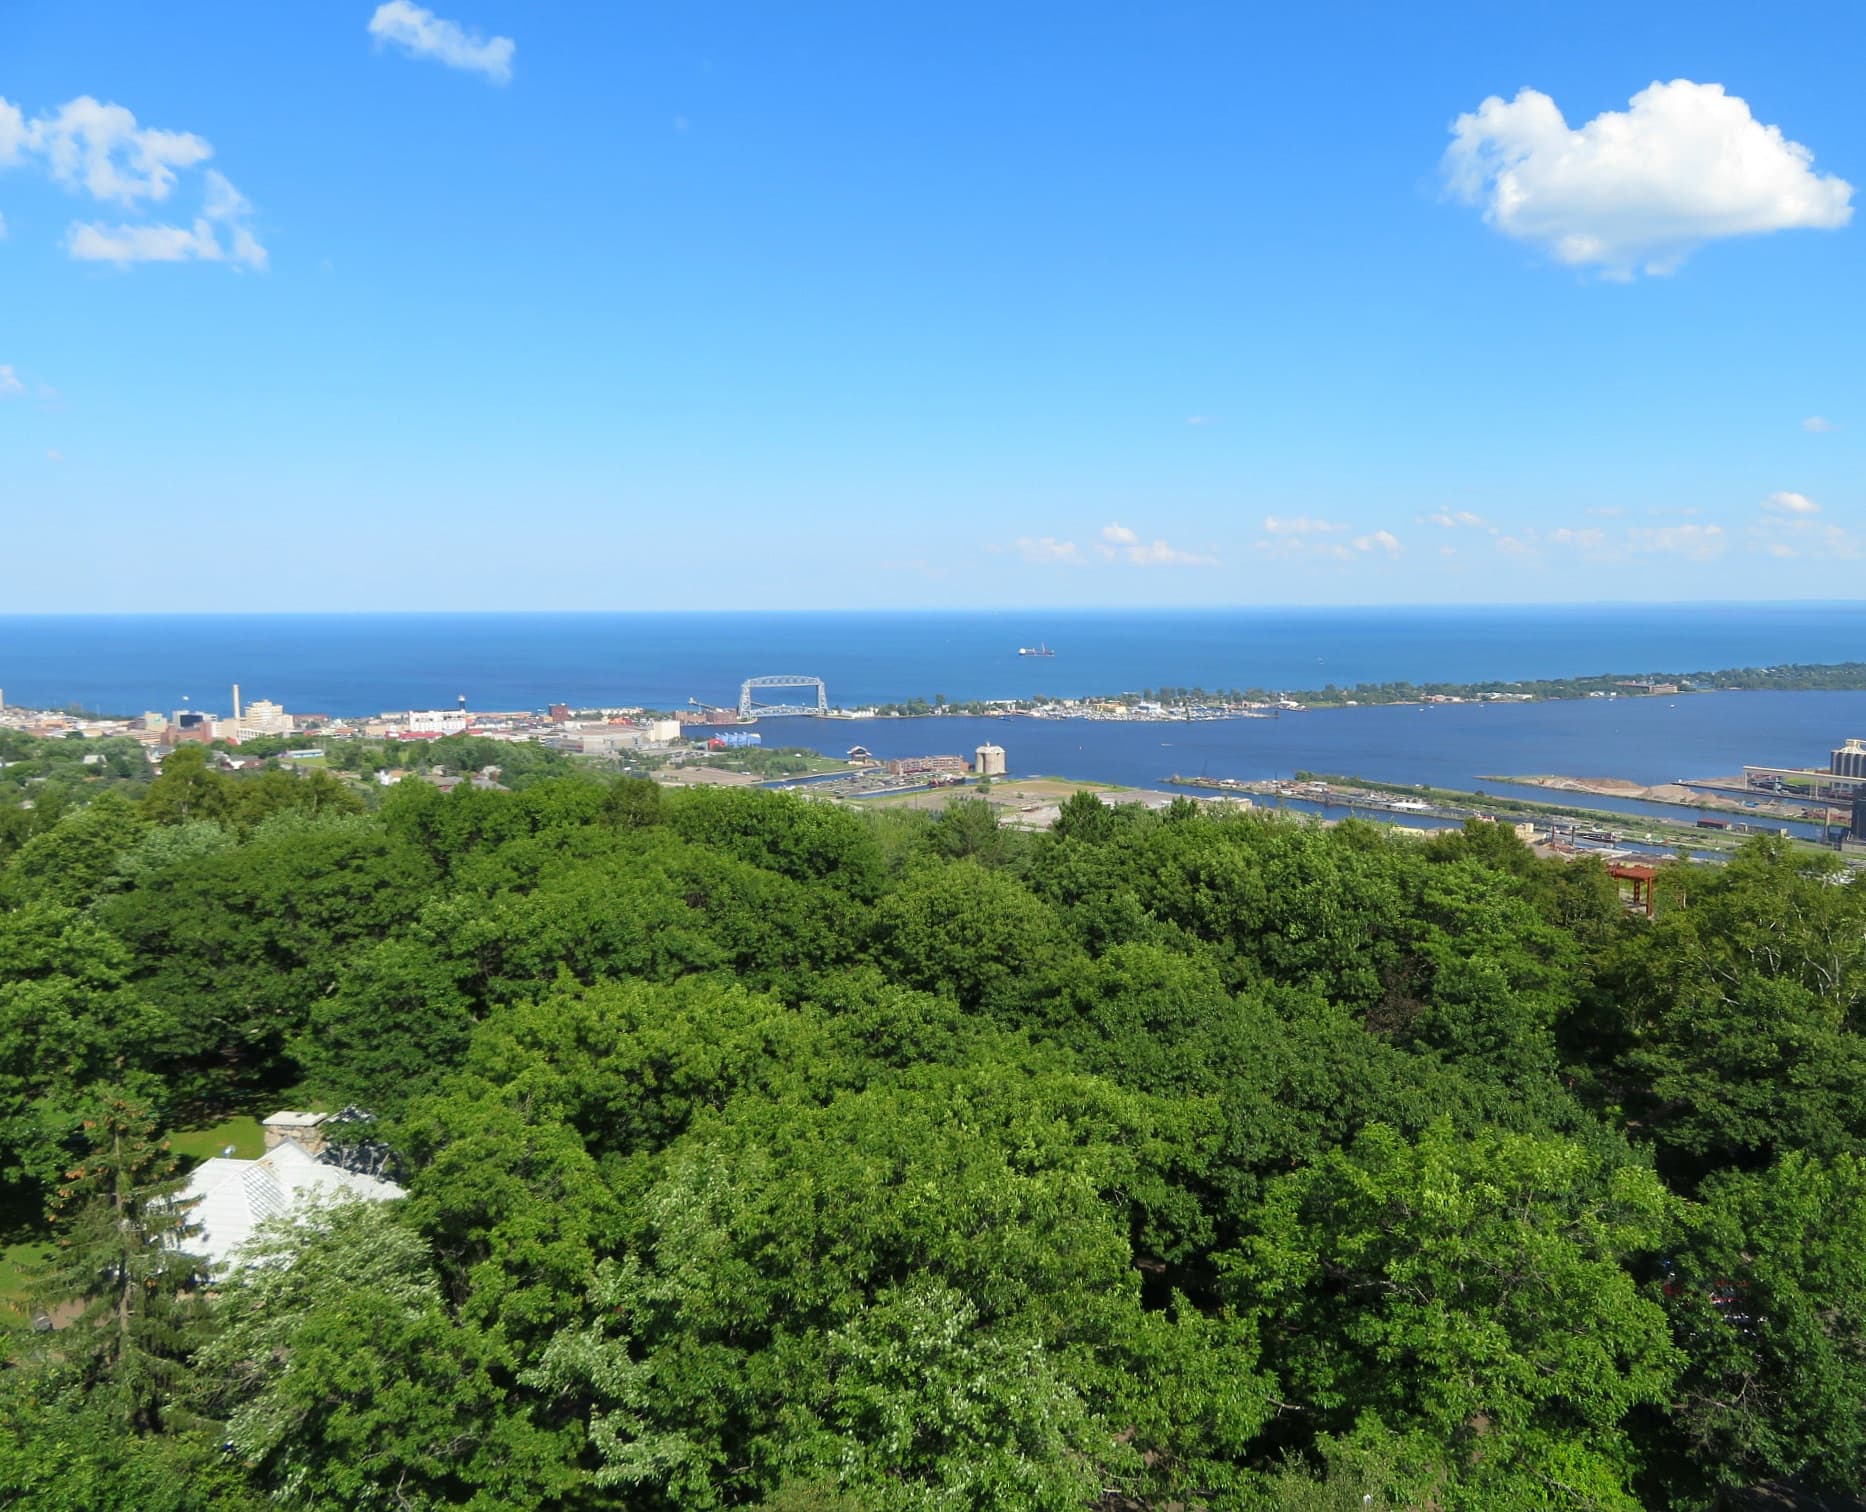 View of Duluth from Enger Tower